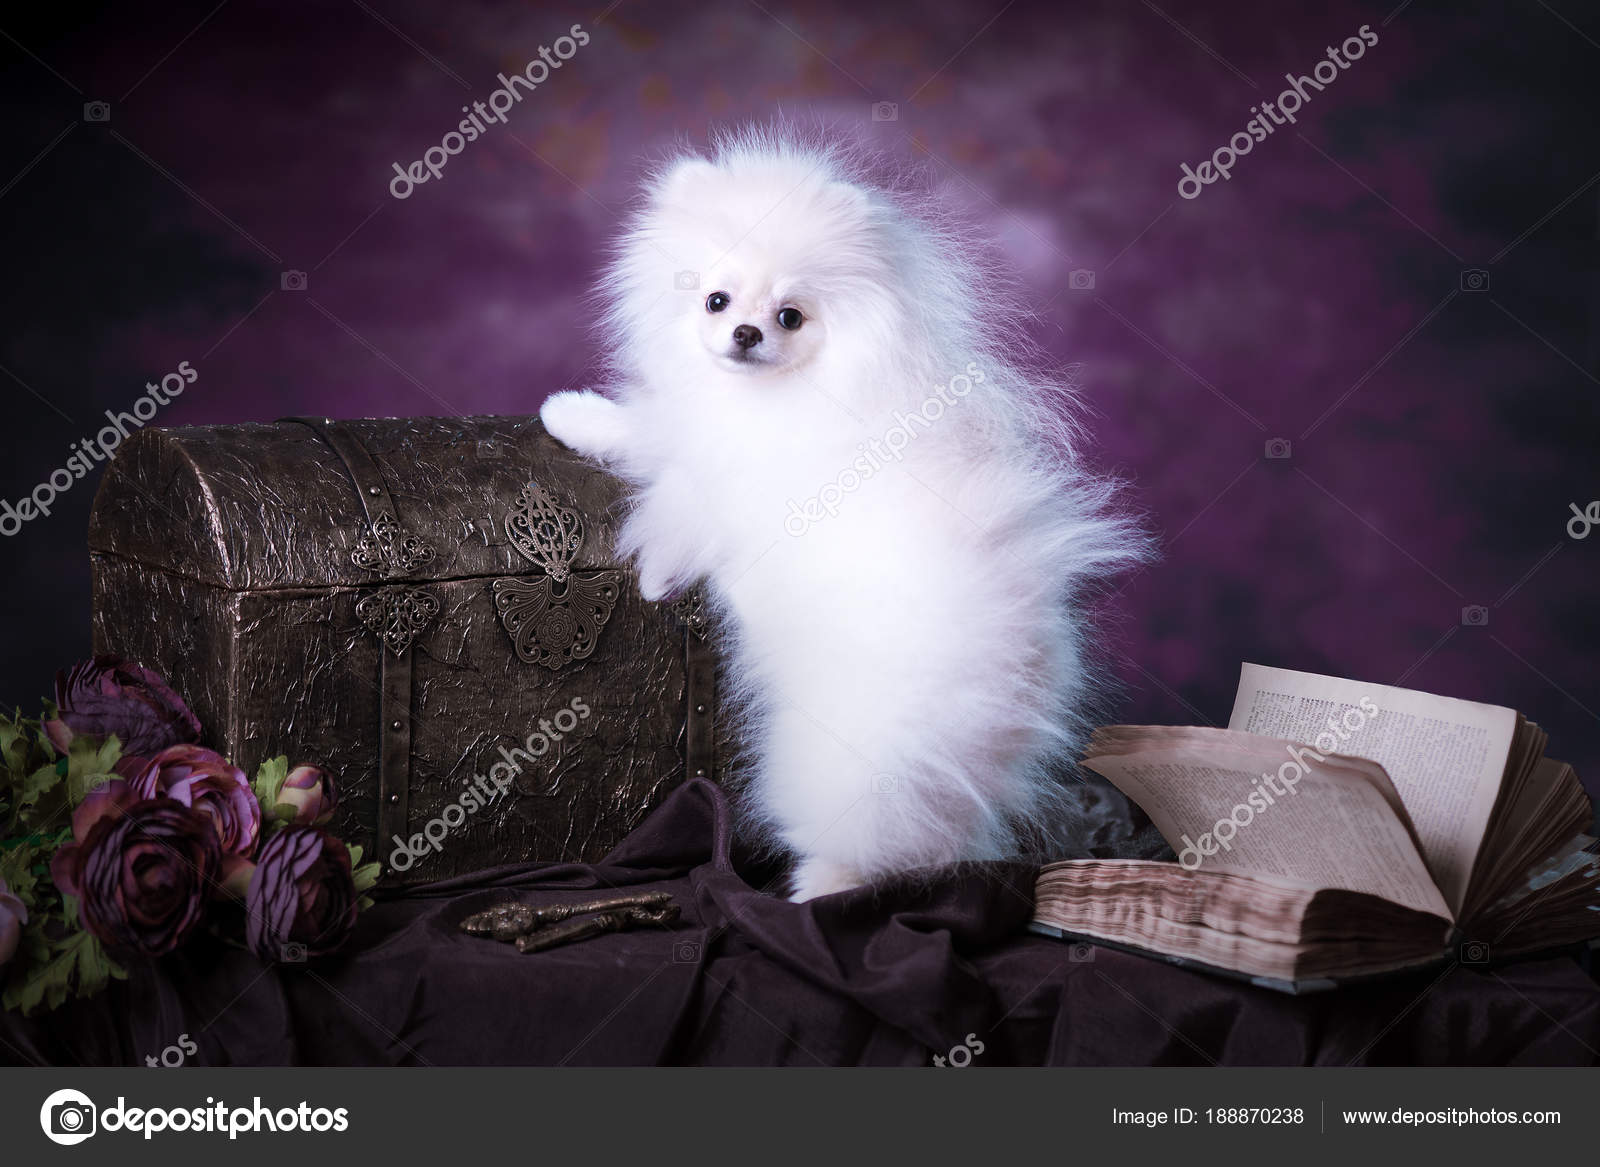 Cute Puppies White Fluffy